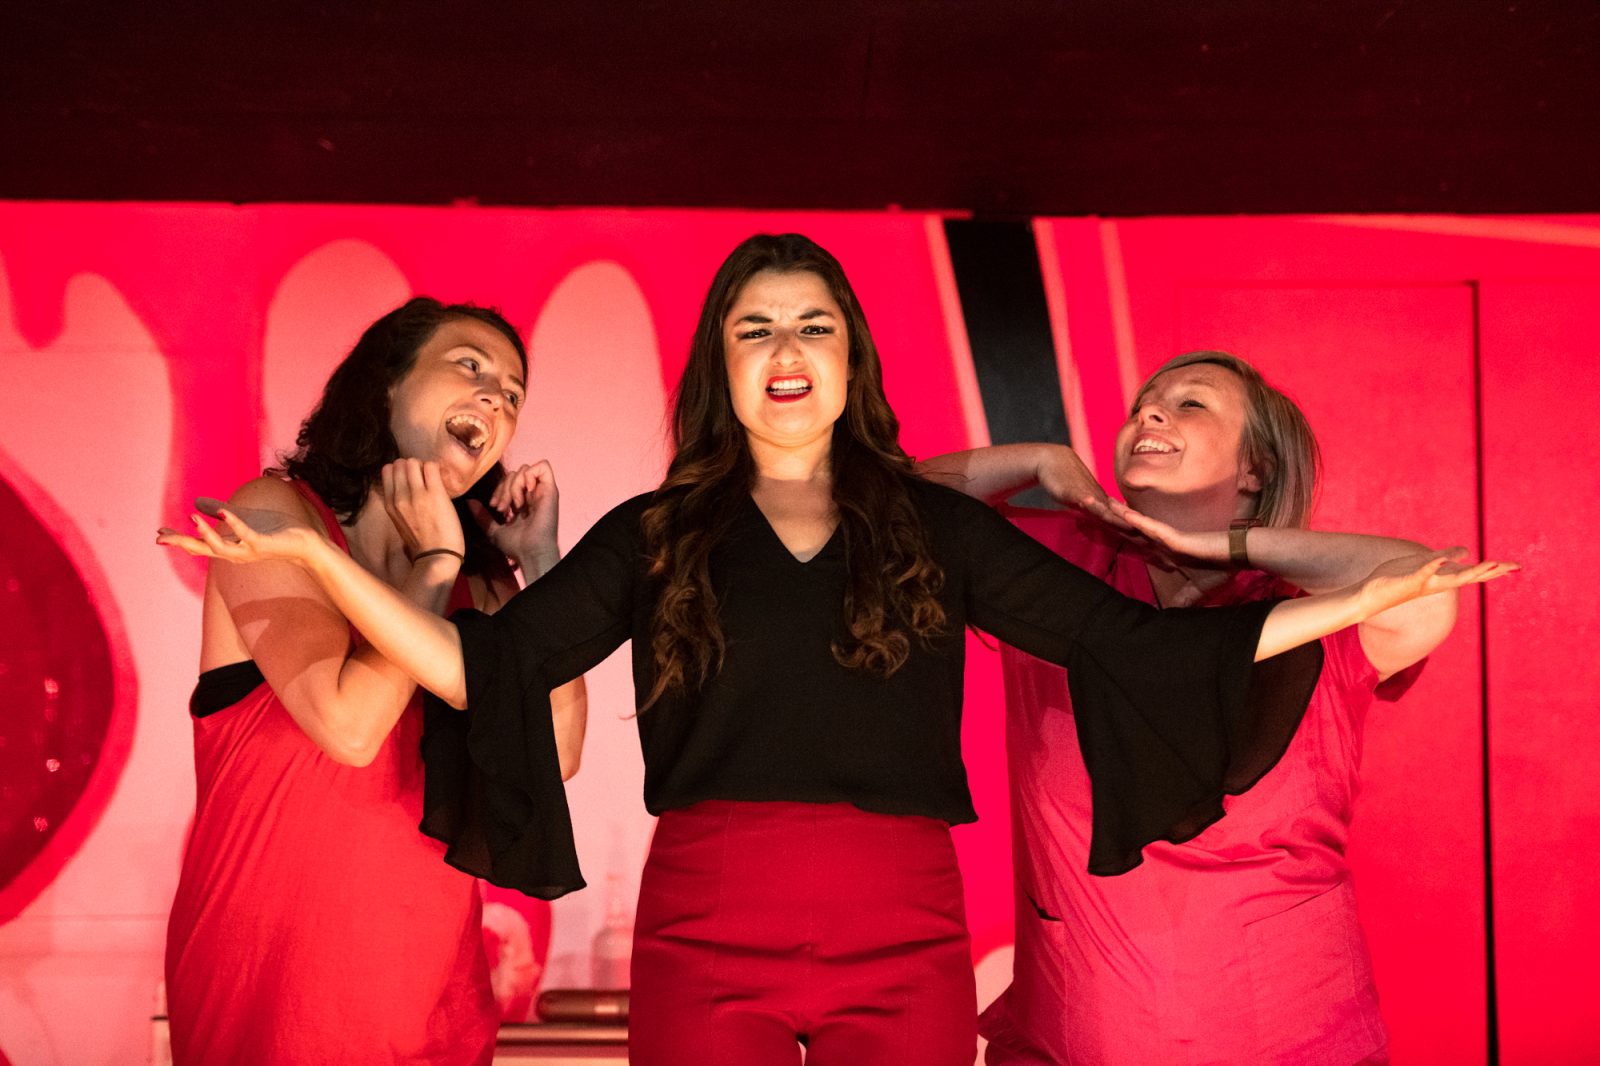 Anna Russell-Martin, Rehanna Macdonald and Lynsey-Anne Moffat on stage for Bloodbank